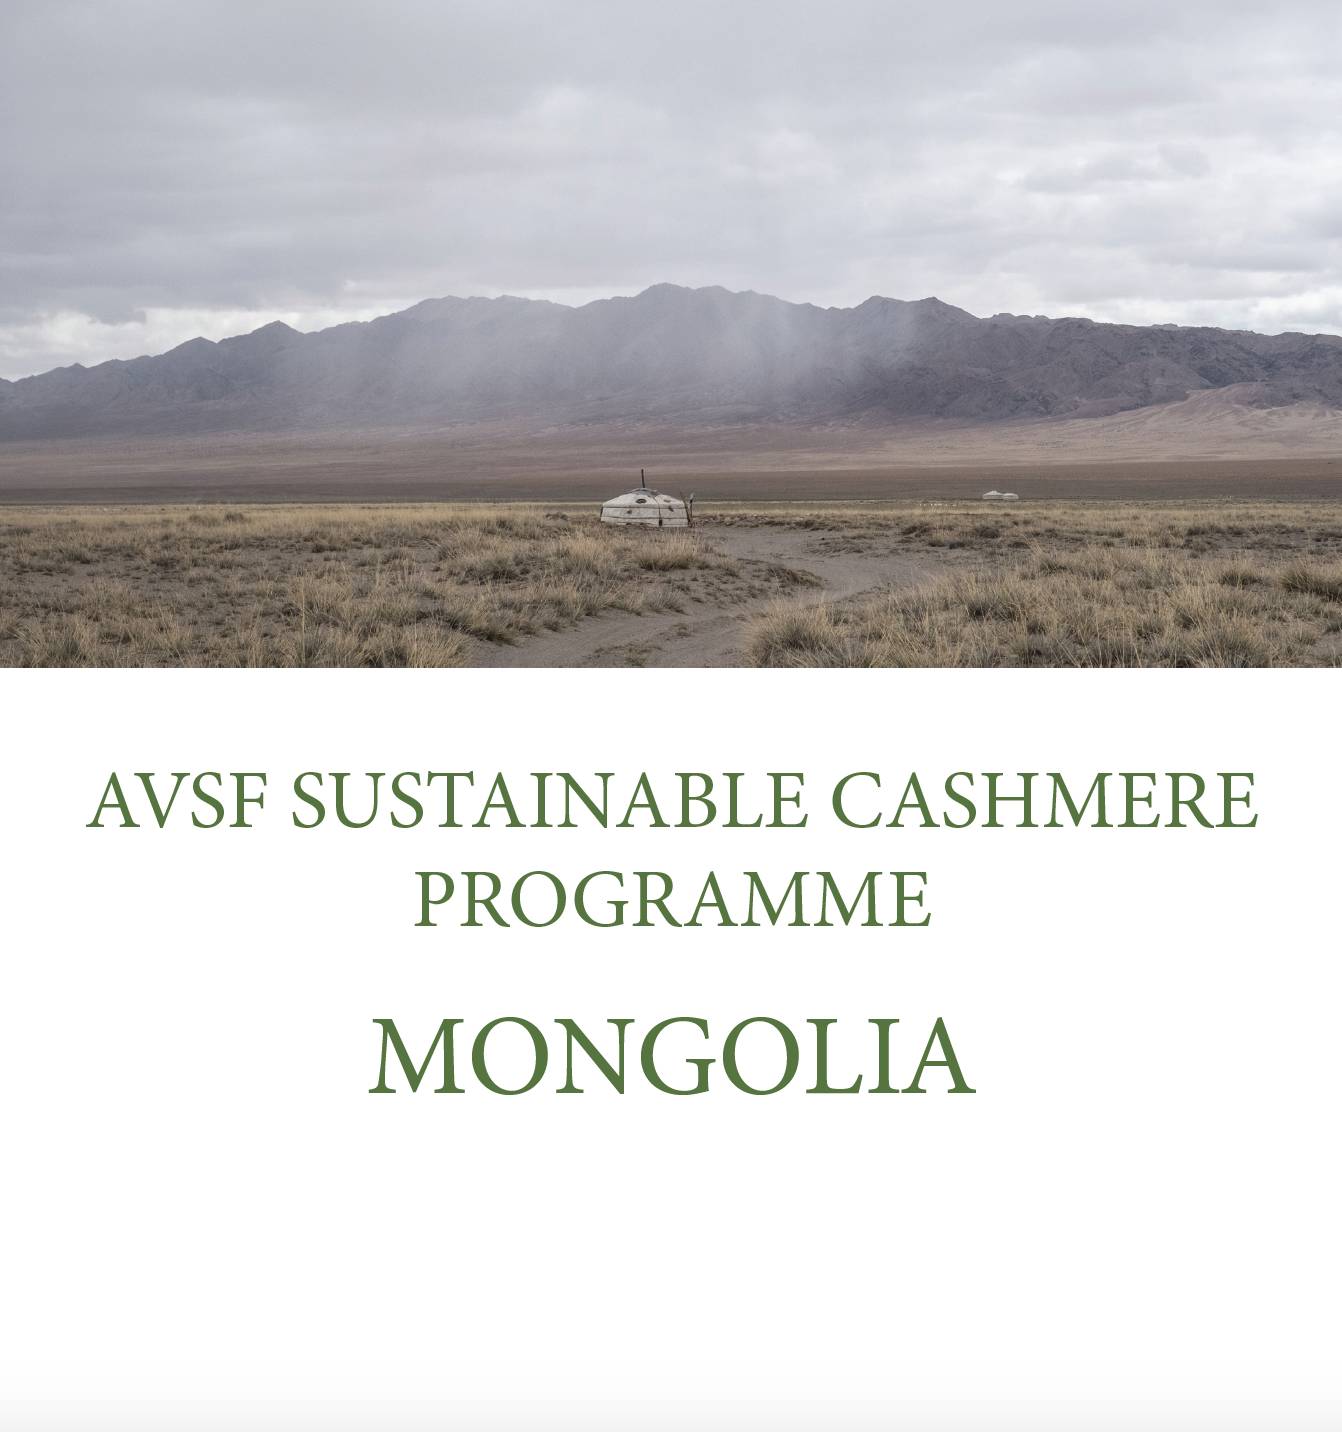 AVSF Sustainable Cashmere Programme in Mongolia